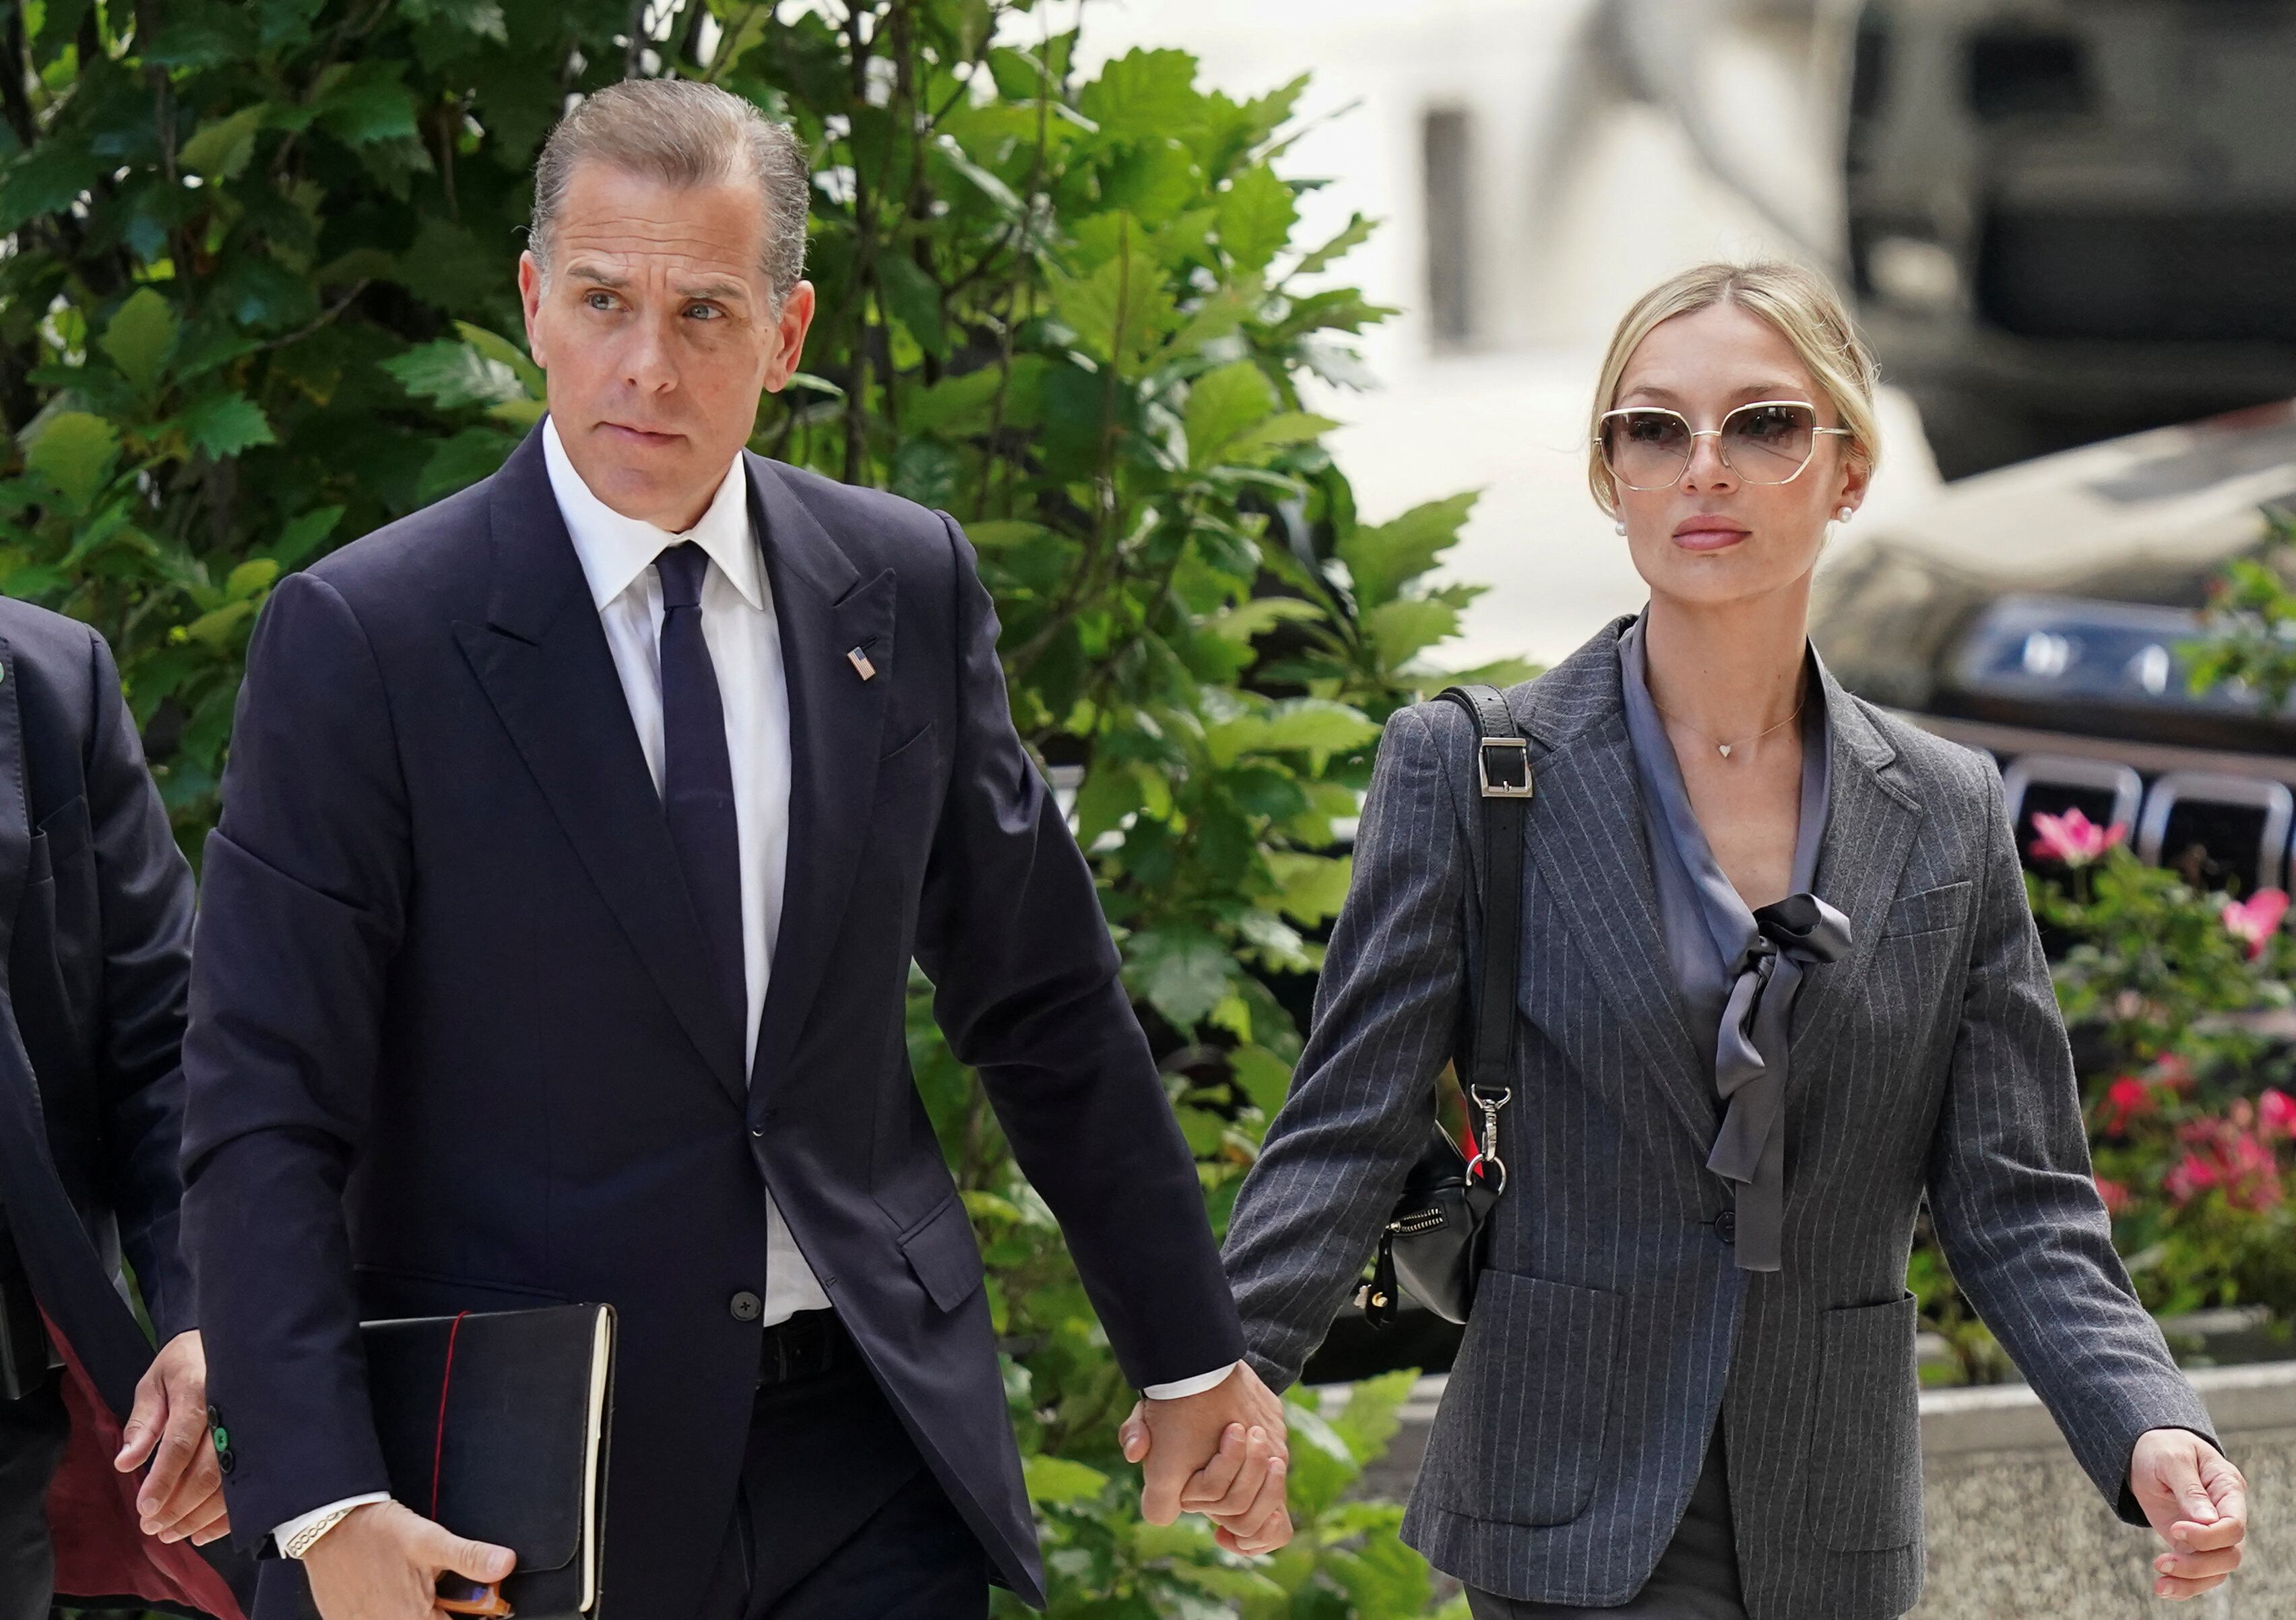 Hunter Biden and his wife, Melissa Cohen Biden, at the first day of trial this Monday in Wilmington (Delaware).